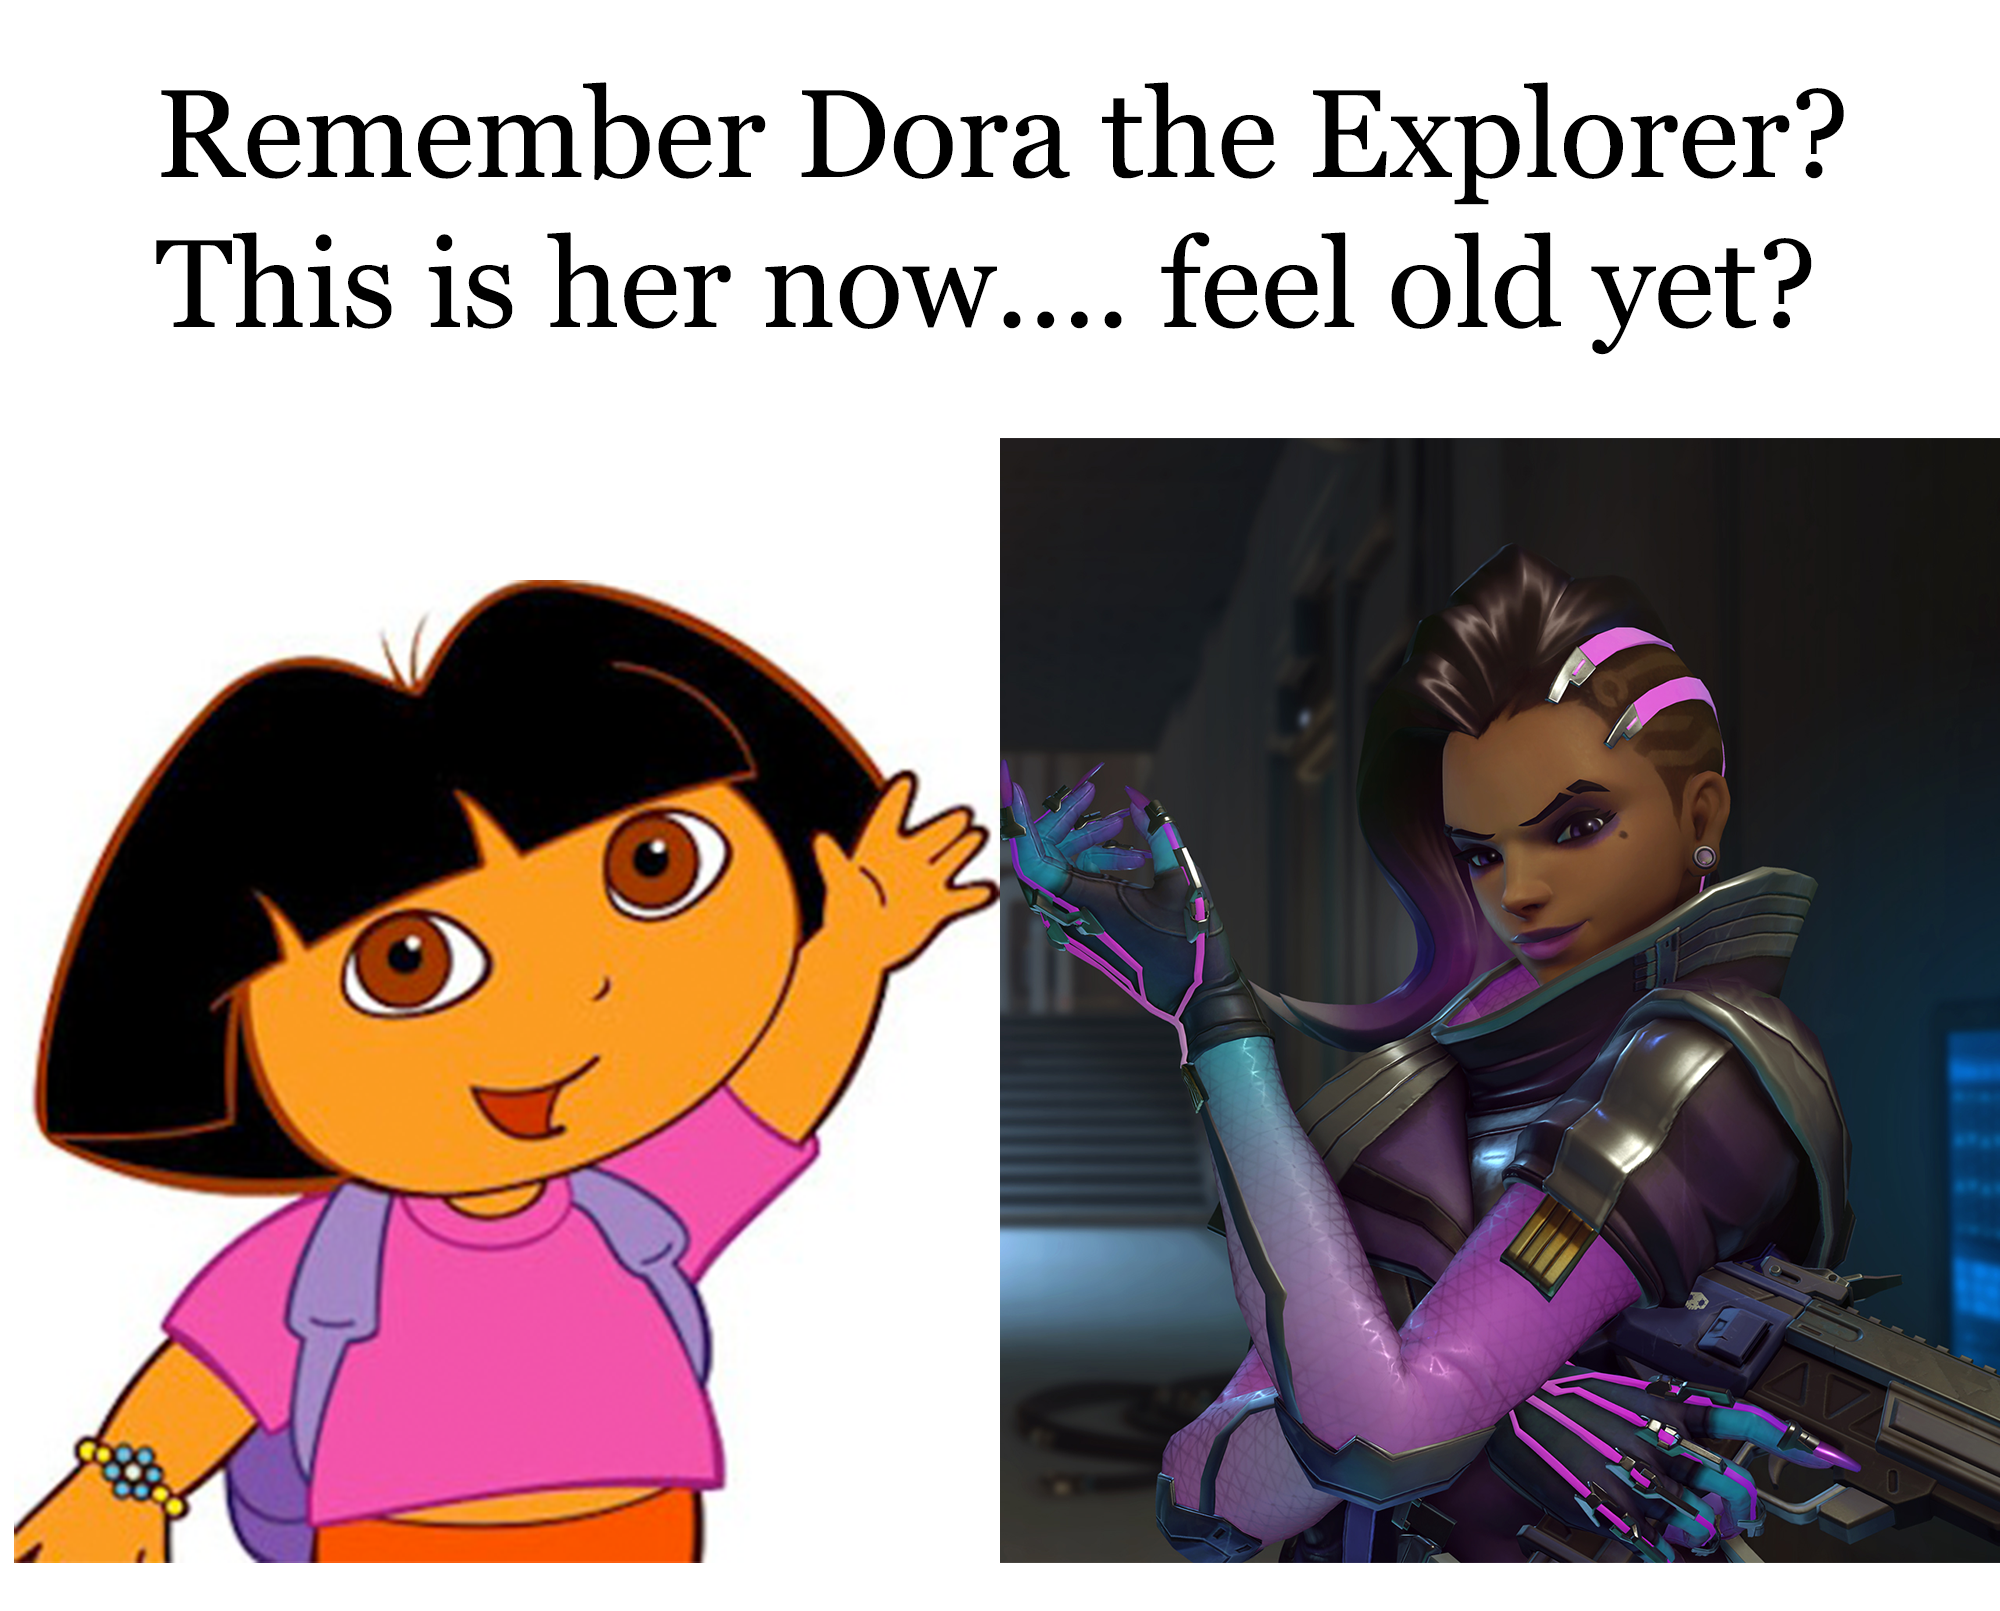 dora the explorer then and now - Remember Dora the Explorer? This is her now.... feel old yet?